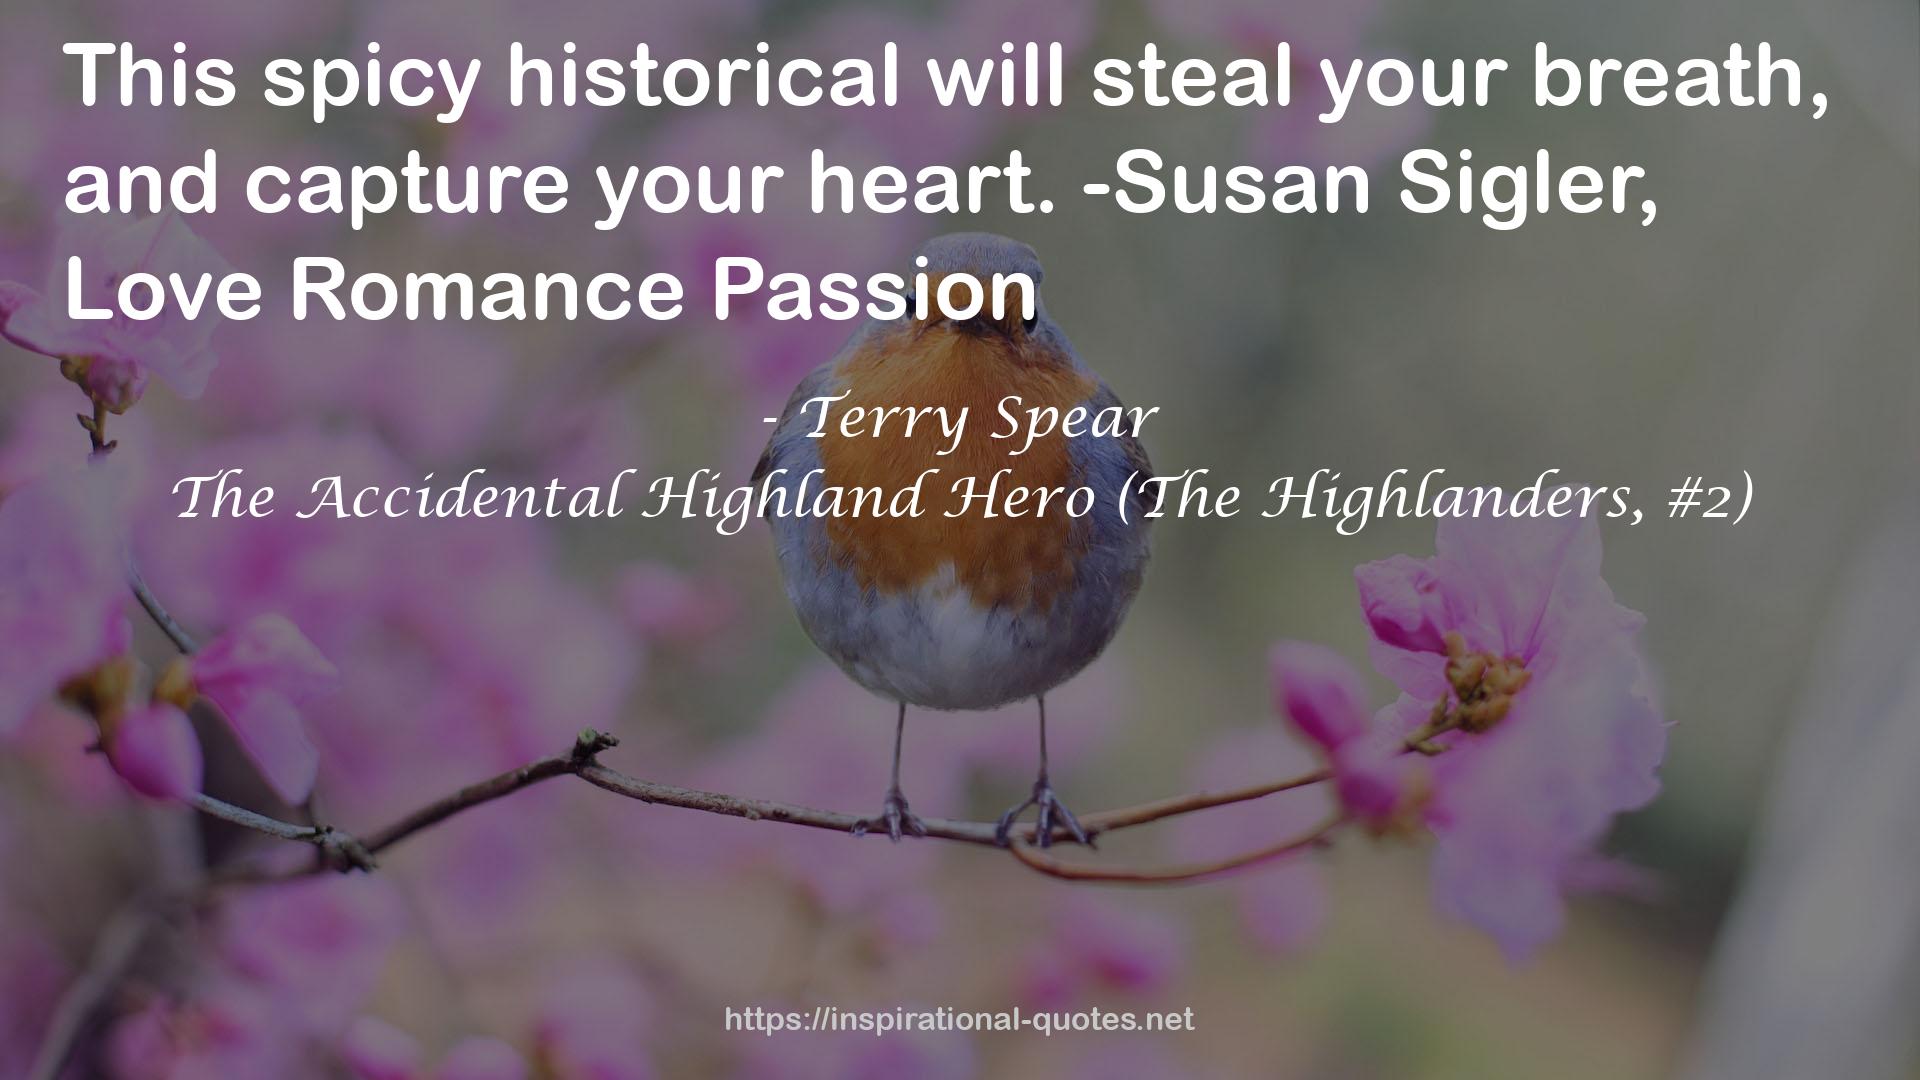 The Accidental Highland Hero (The Highlanders, #2) QUOTES